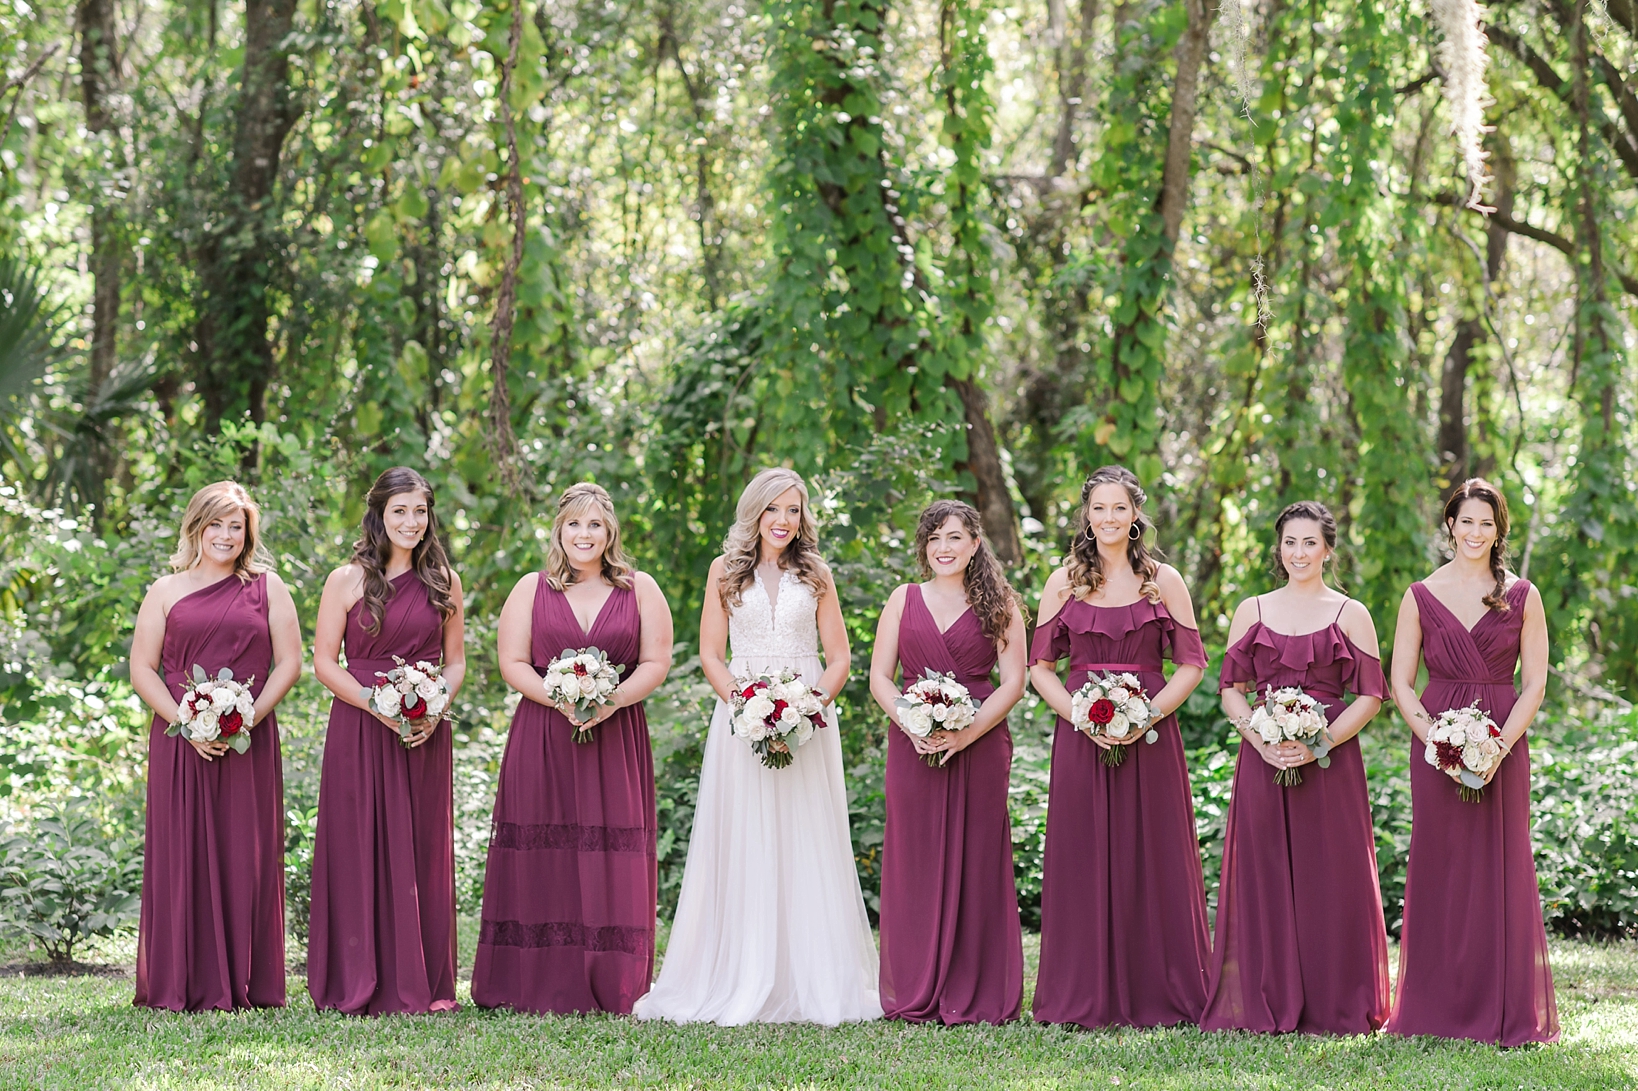 The Bride with her Bridesmaids holding bouquets surrounded by greenery at bakers ranch